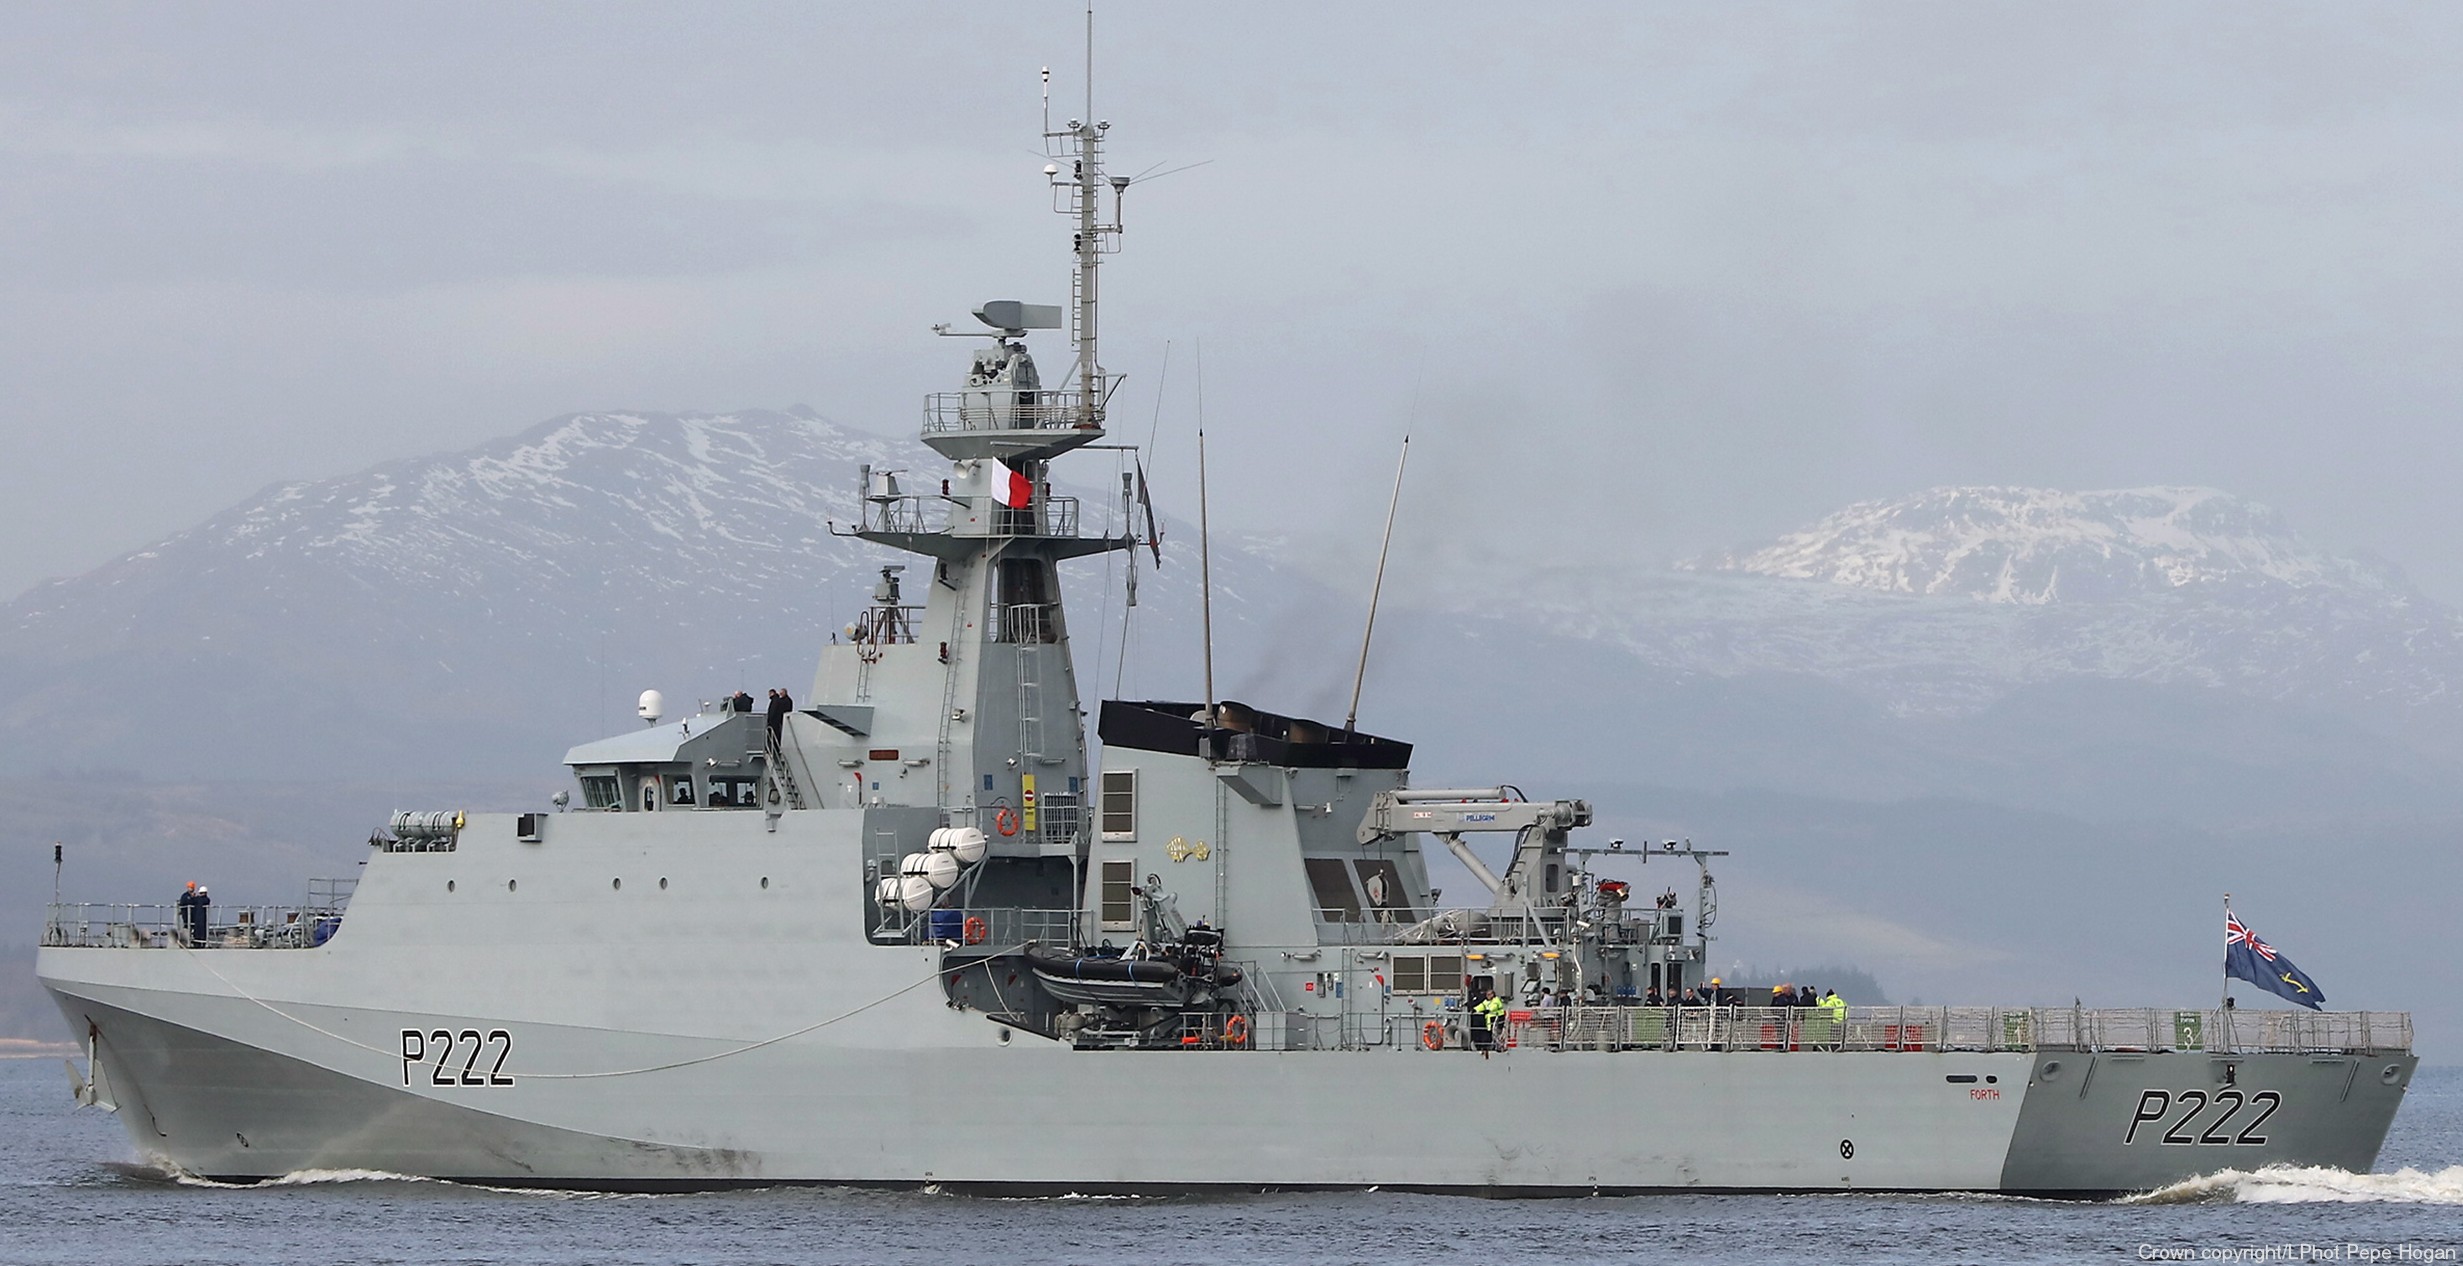 p222 hms forth river class offshore patrol vessel opv royal navy 09x bae systems